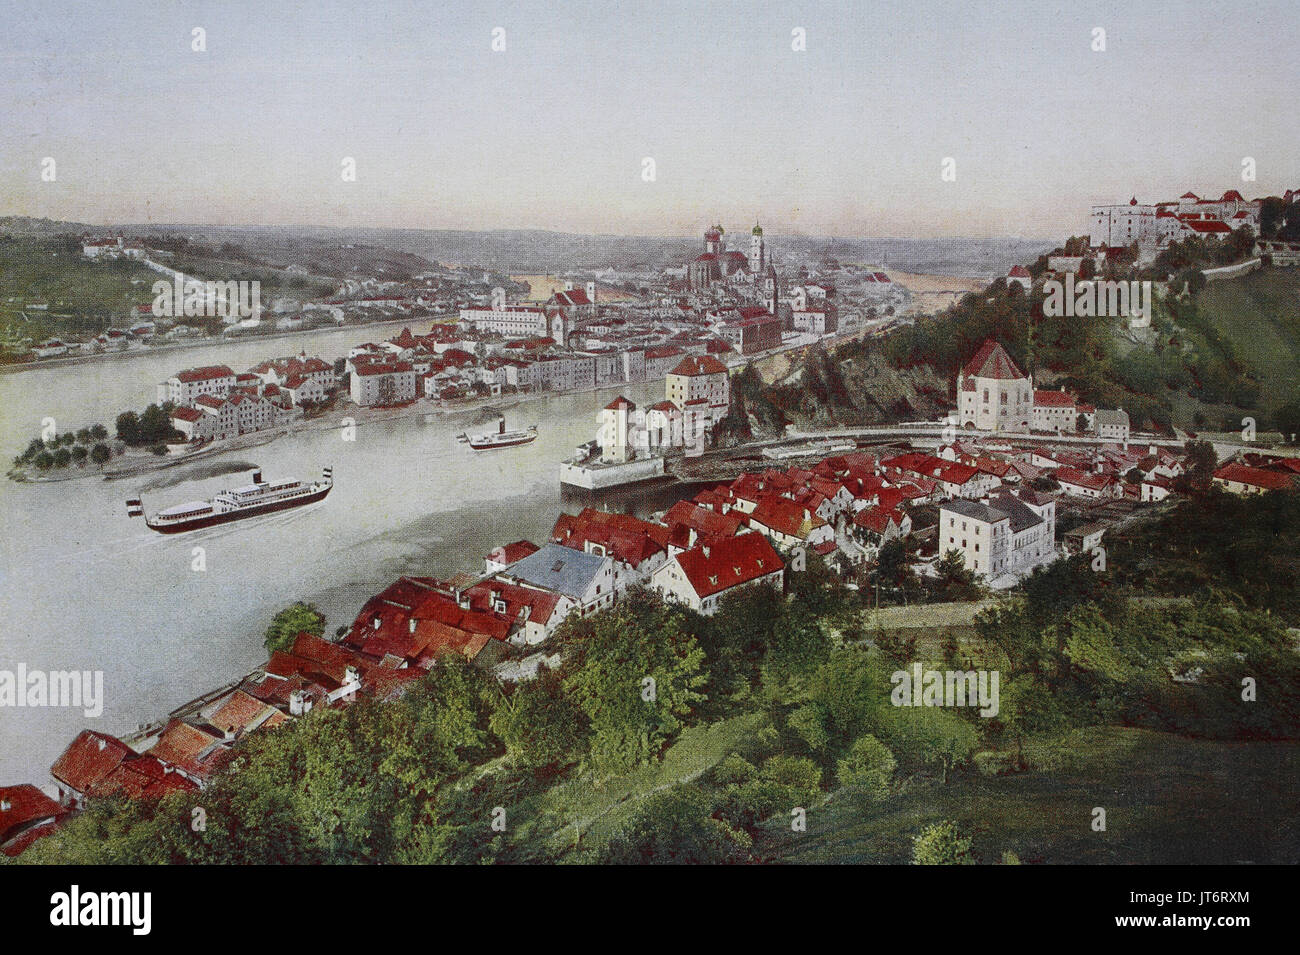 Historical photo of Passau, Bavaria, Germany, Digital improved reproduction of an image published between 1880 - 1885 Stock Photo